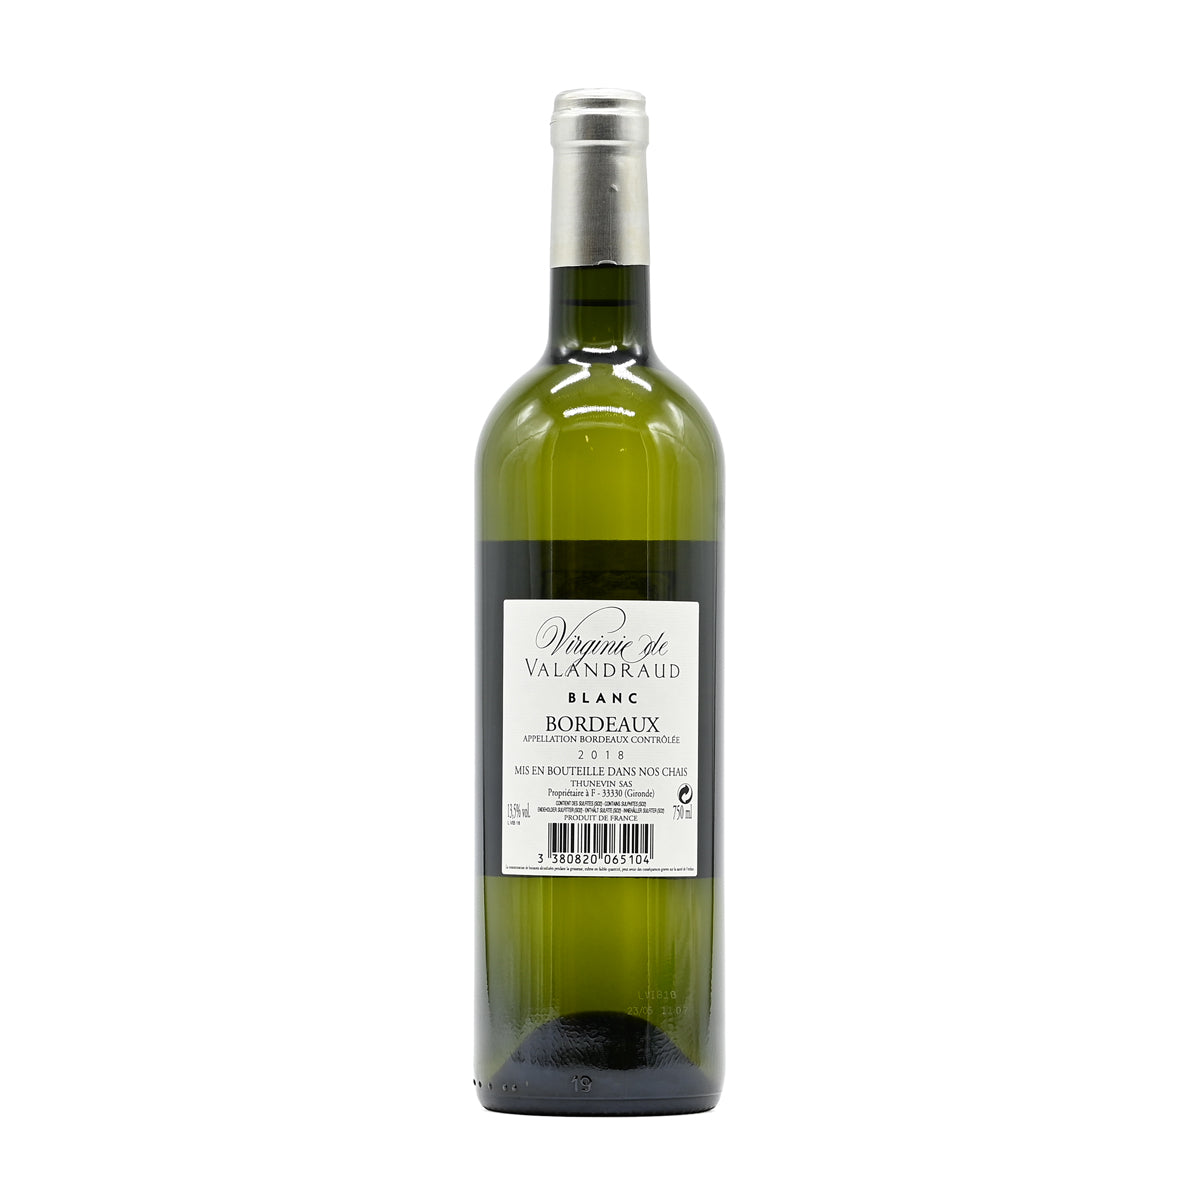 Virginie de Valandraud Blanc 2018, 750ml French white, made from a blend of Sémillon, Sauvignon Blanc and Sauvignon Gris; from Bordeaux, France – GDV Fine Wines, Hong Kong